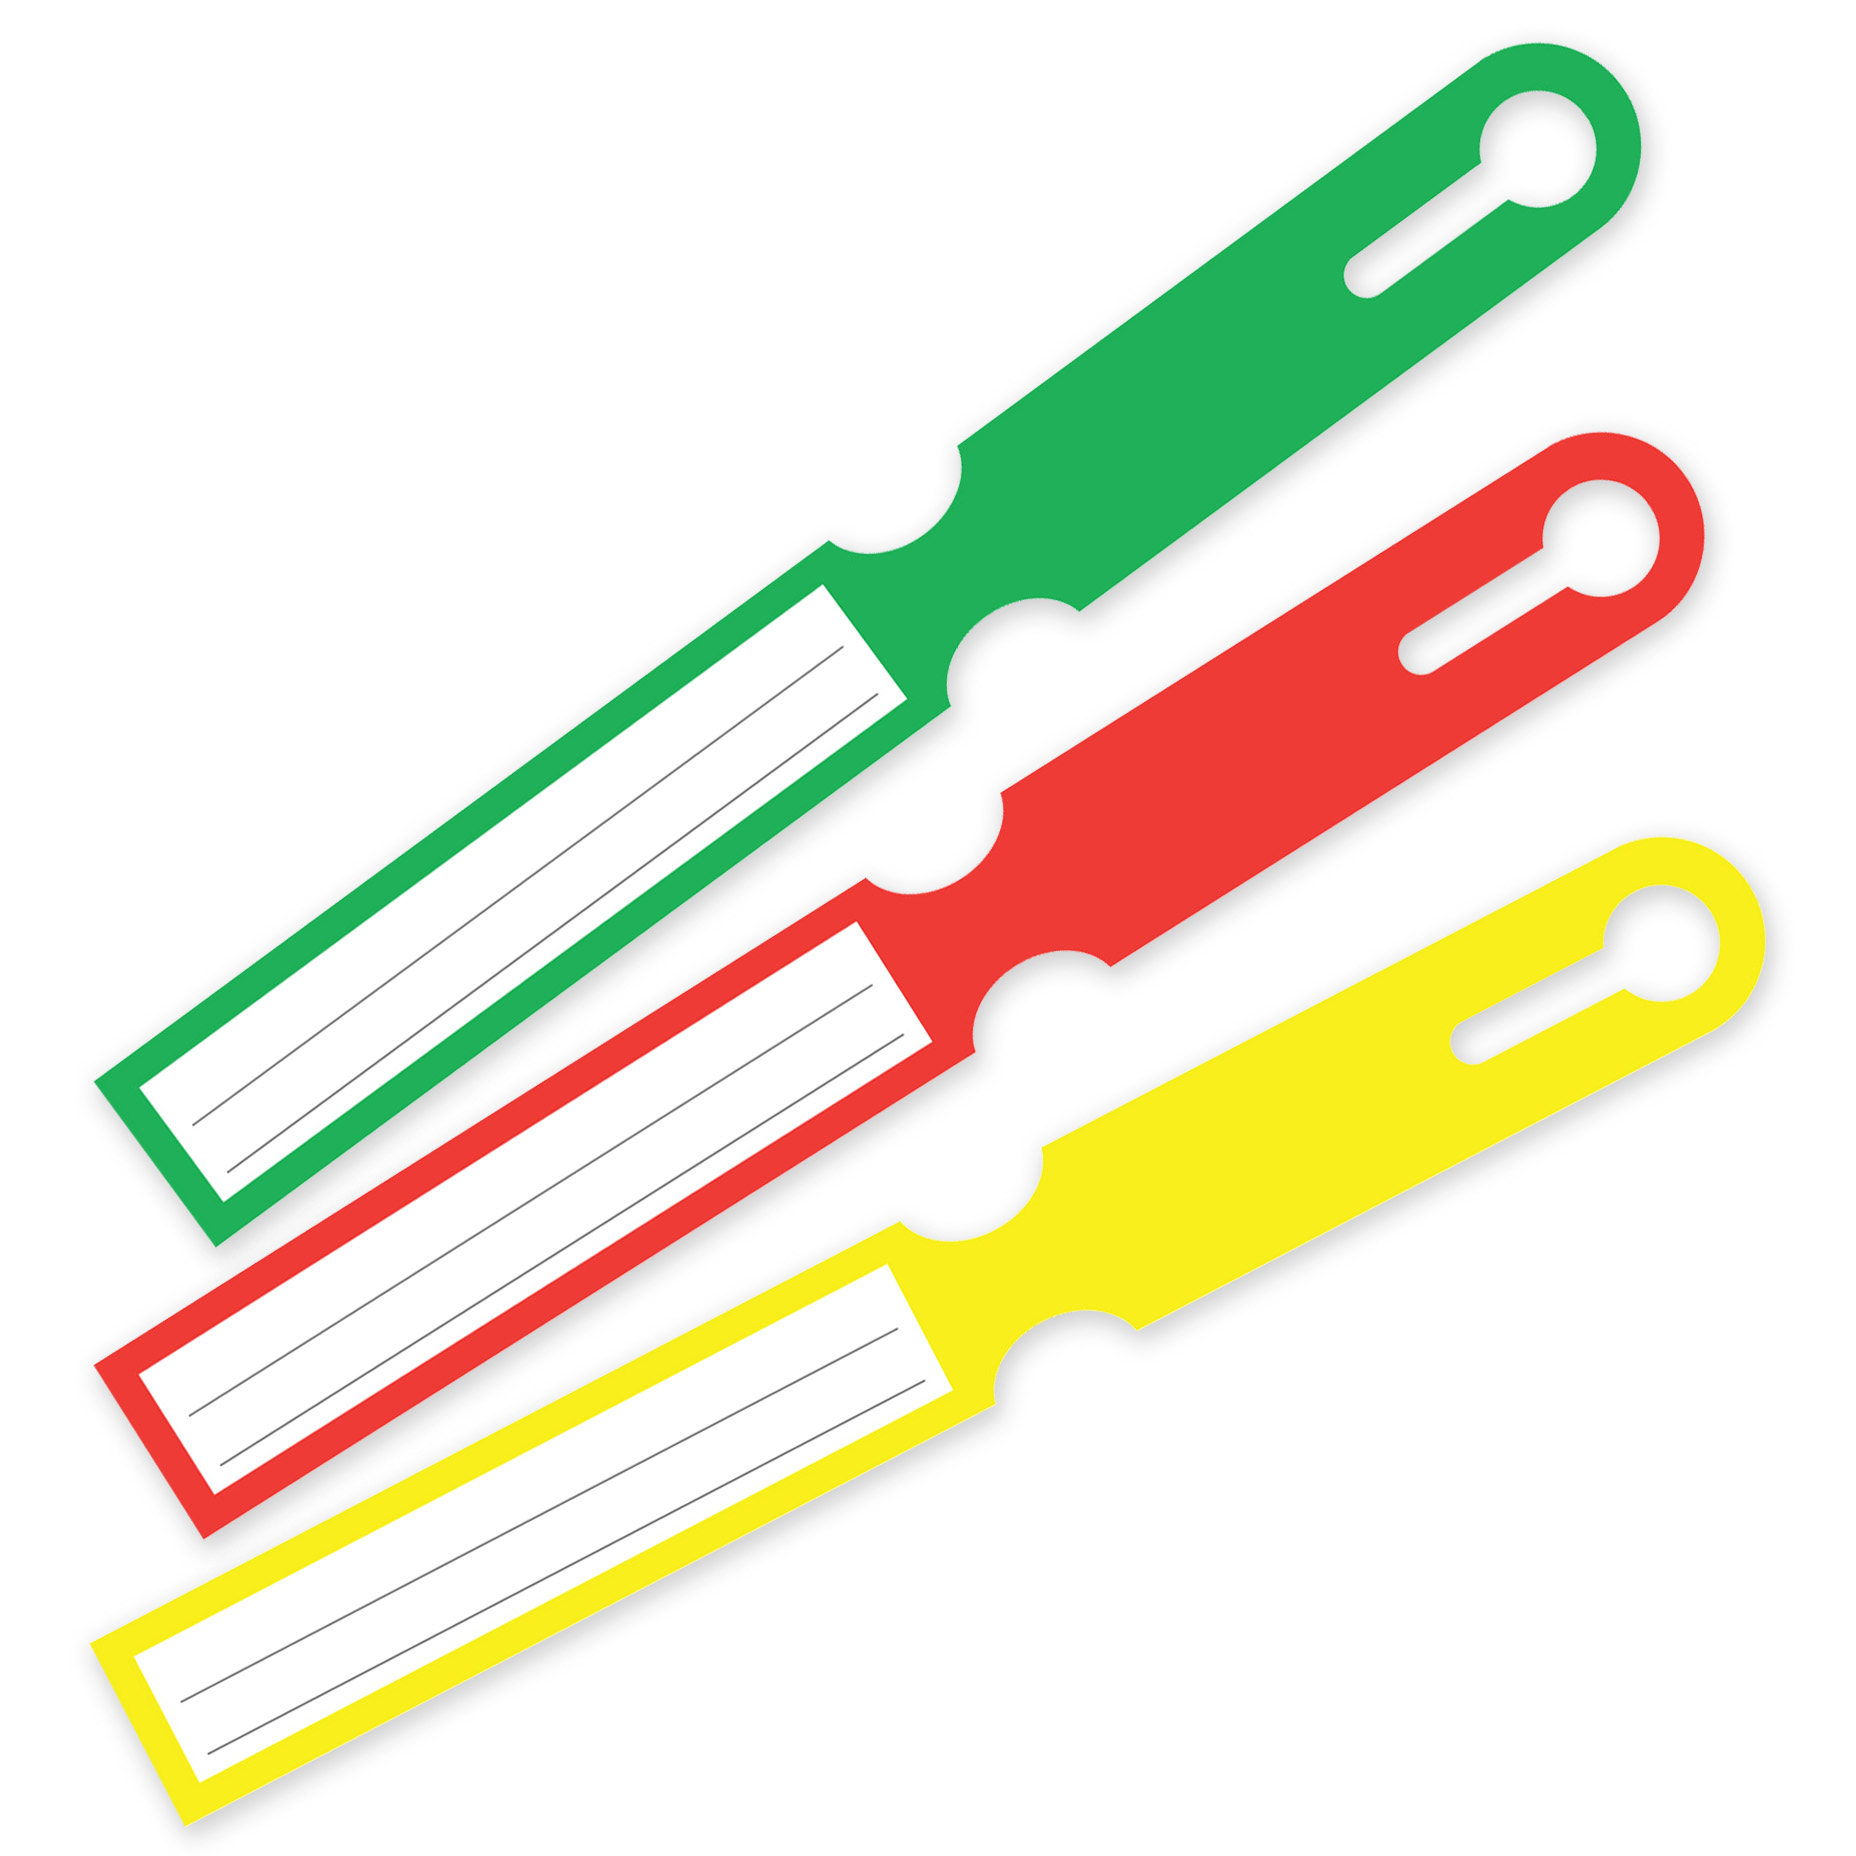 Label 2855x32 mm with writing lines in green, yellow, red and white